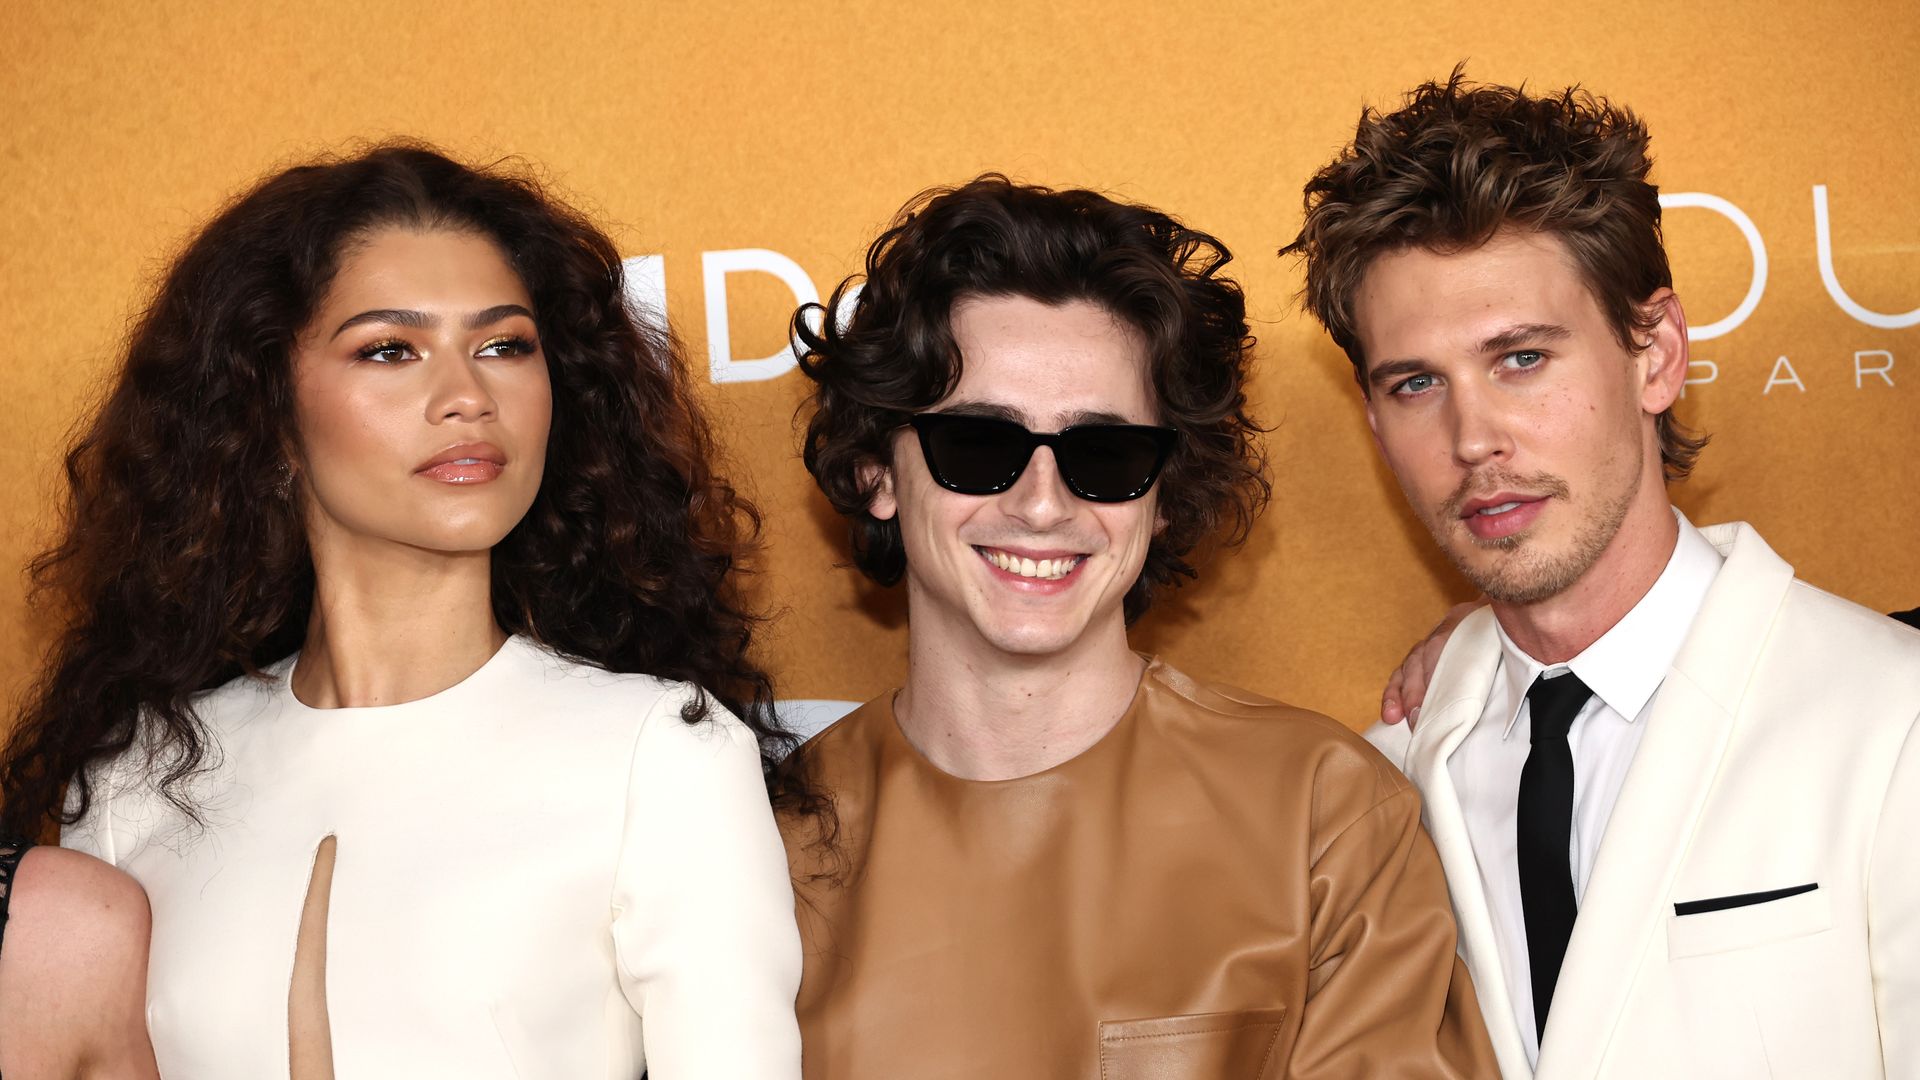 Zendaya, Timothée Chalamet and Austin Butler attend the "Dune: Part Two" premiere at Lincoln Center in NYC